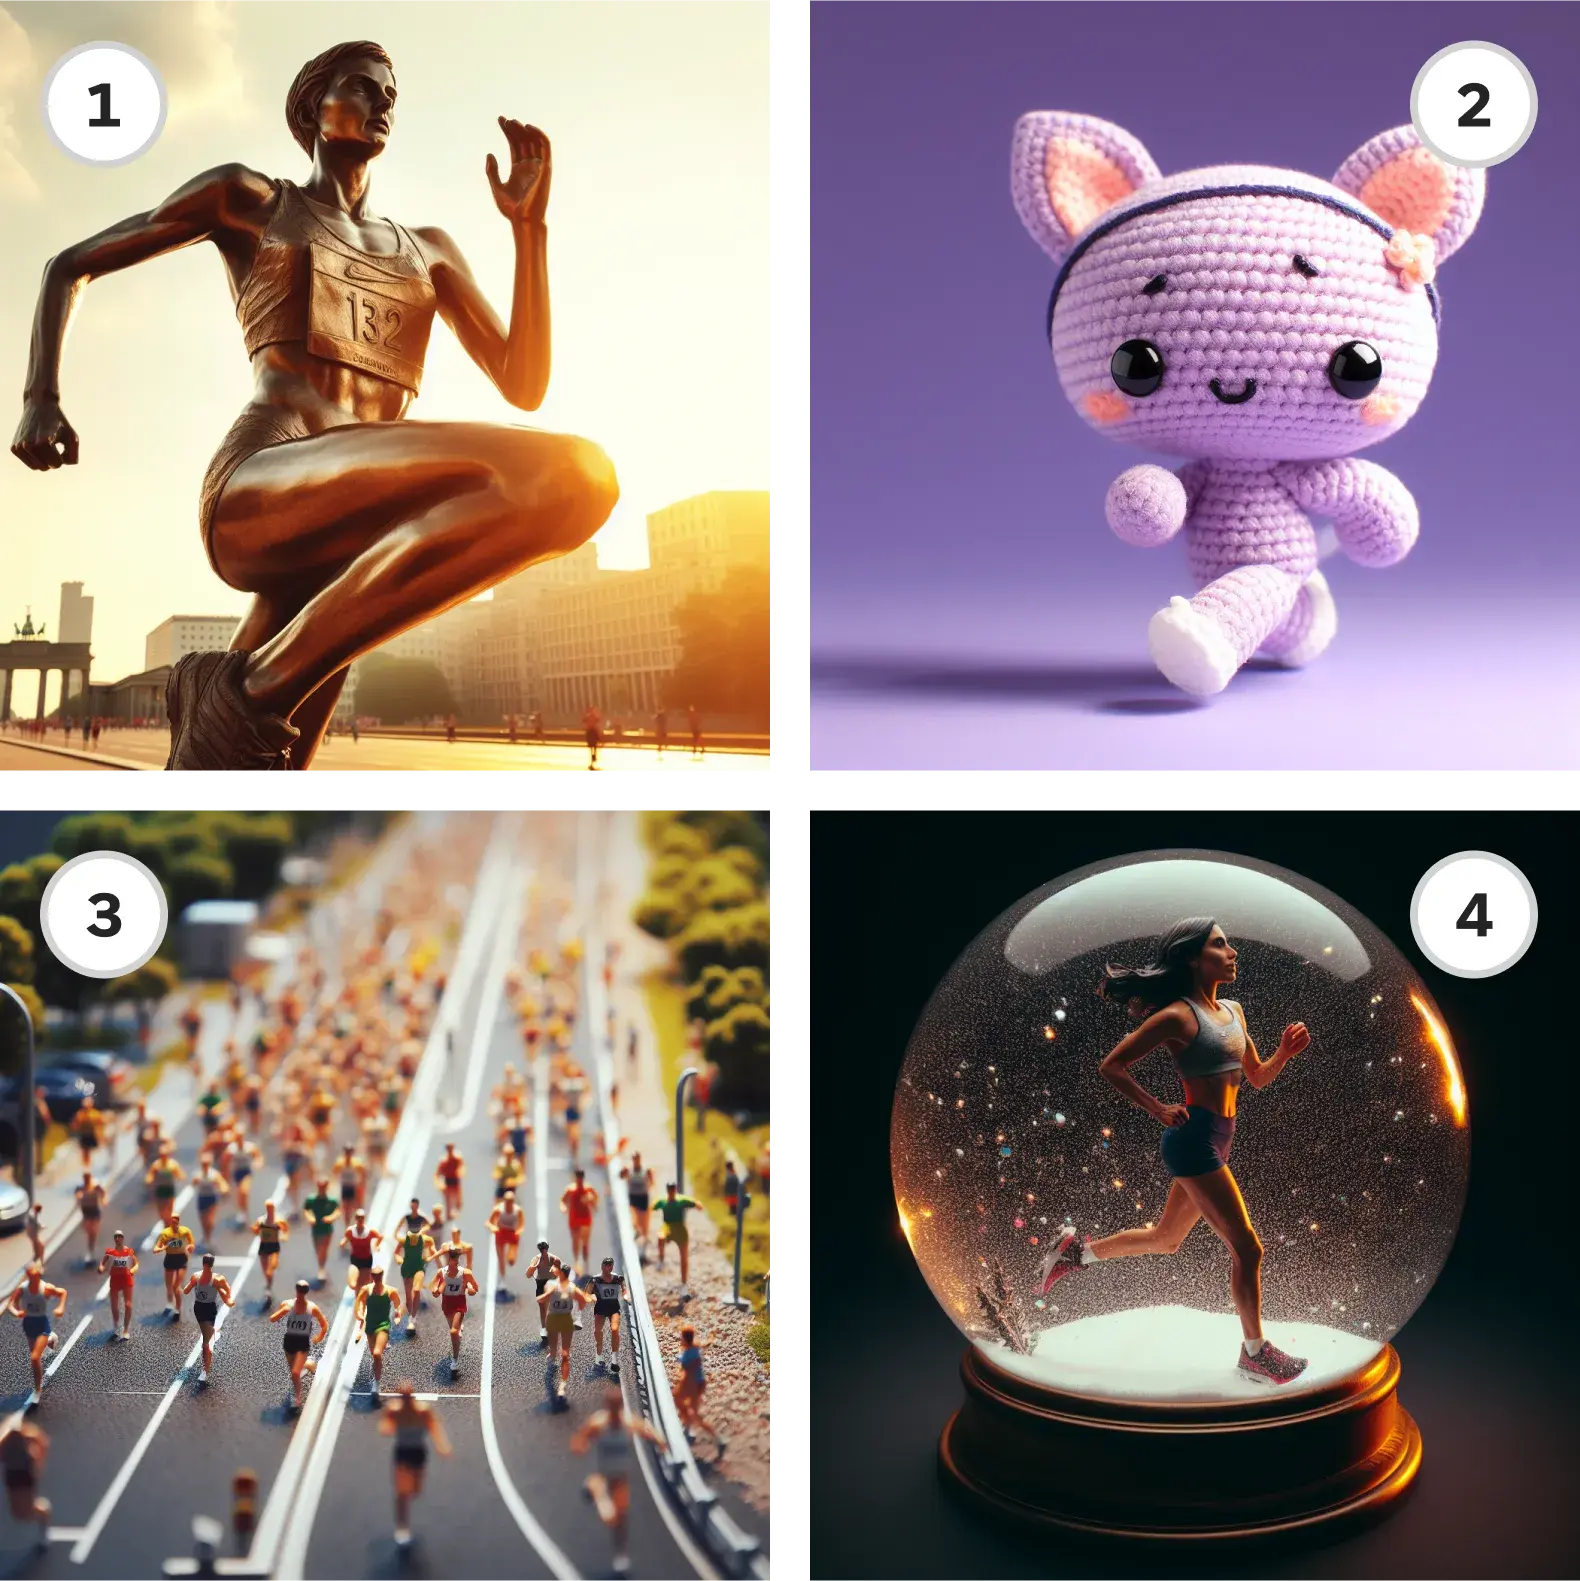 Four different images of runners rendered by using text prompts to indicate different kinds of objects, such as sculpture or crochet.